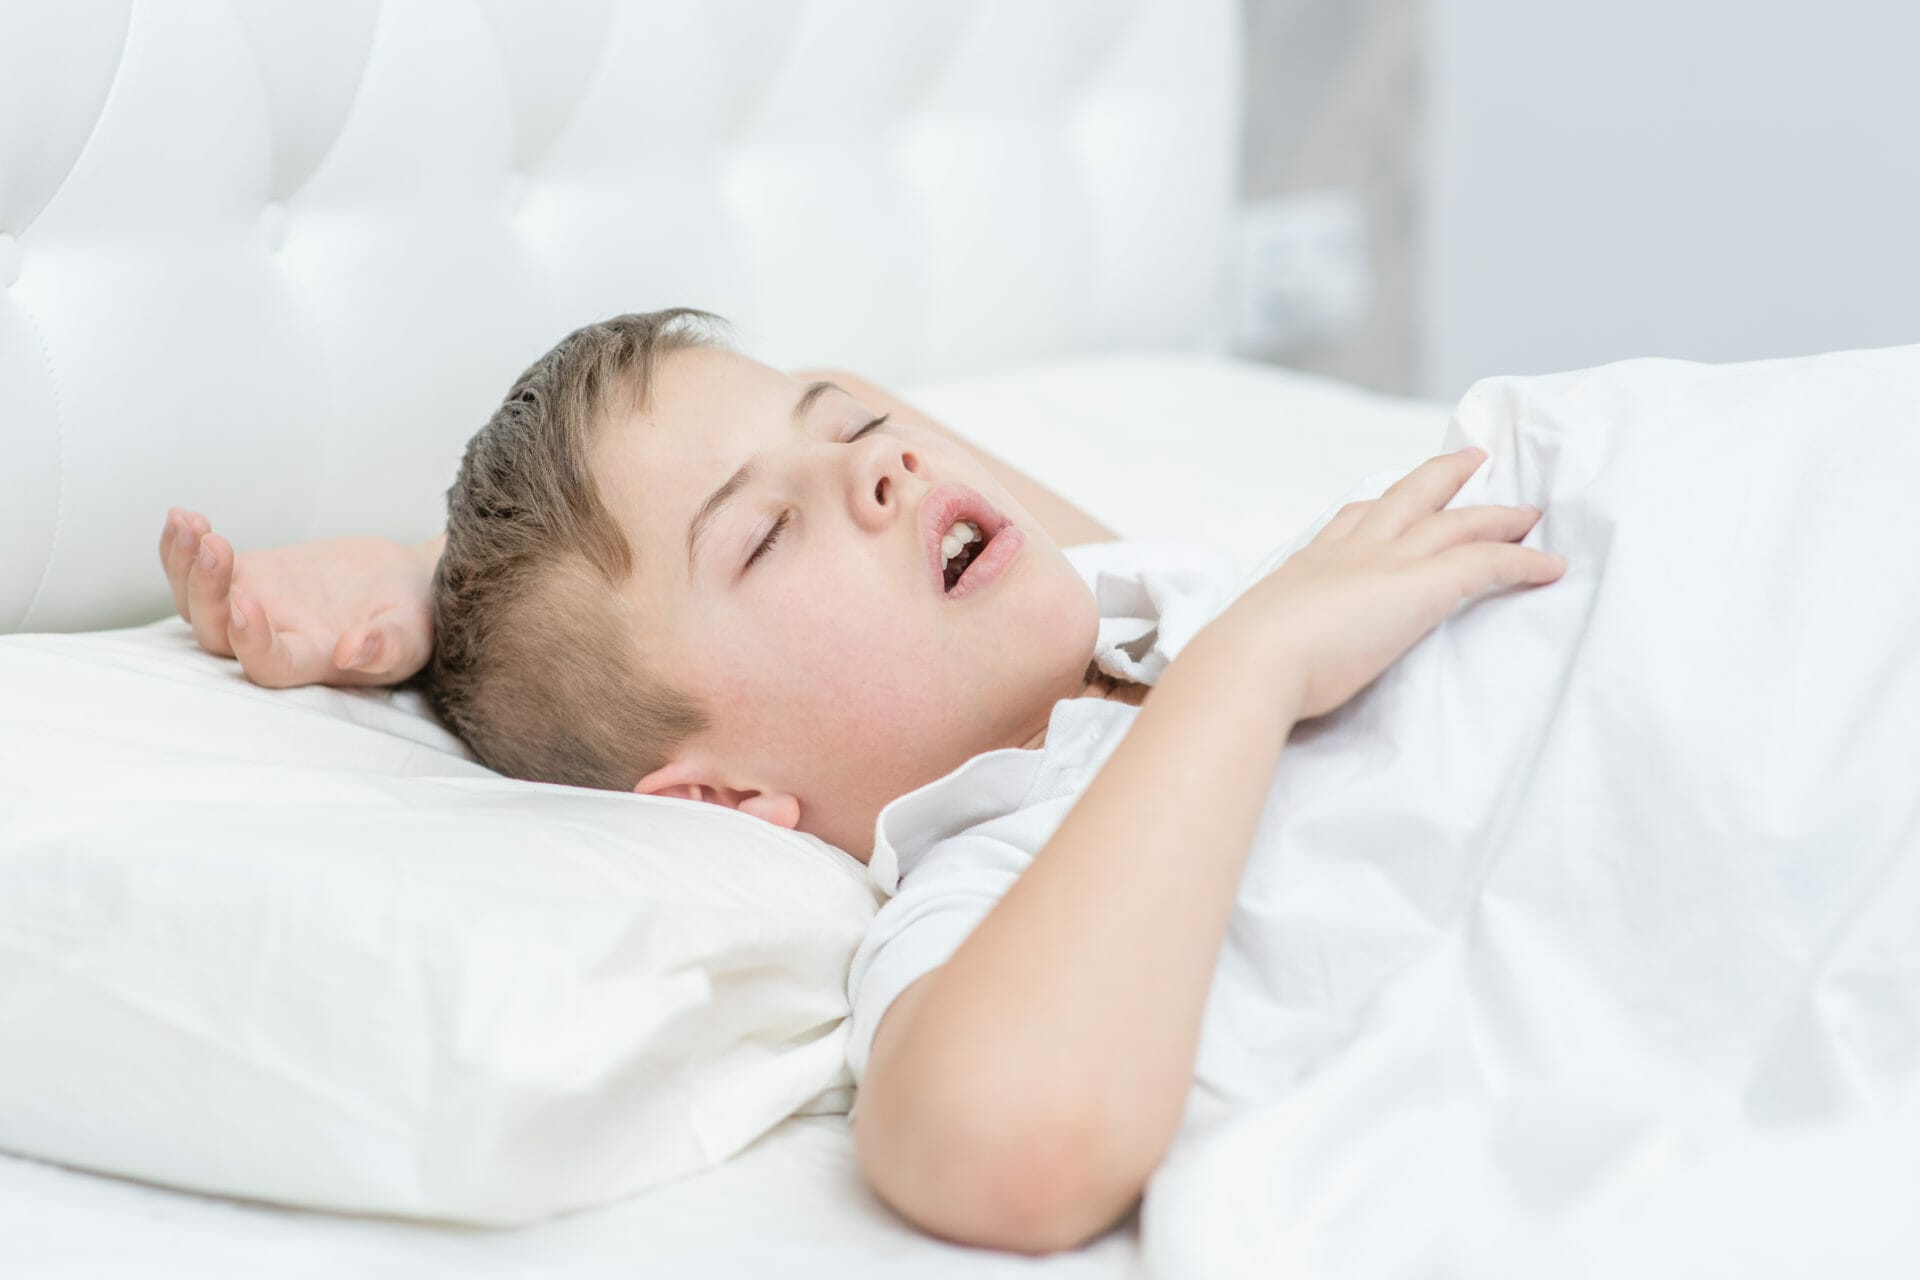 Boy sleeping with mouth open